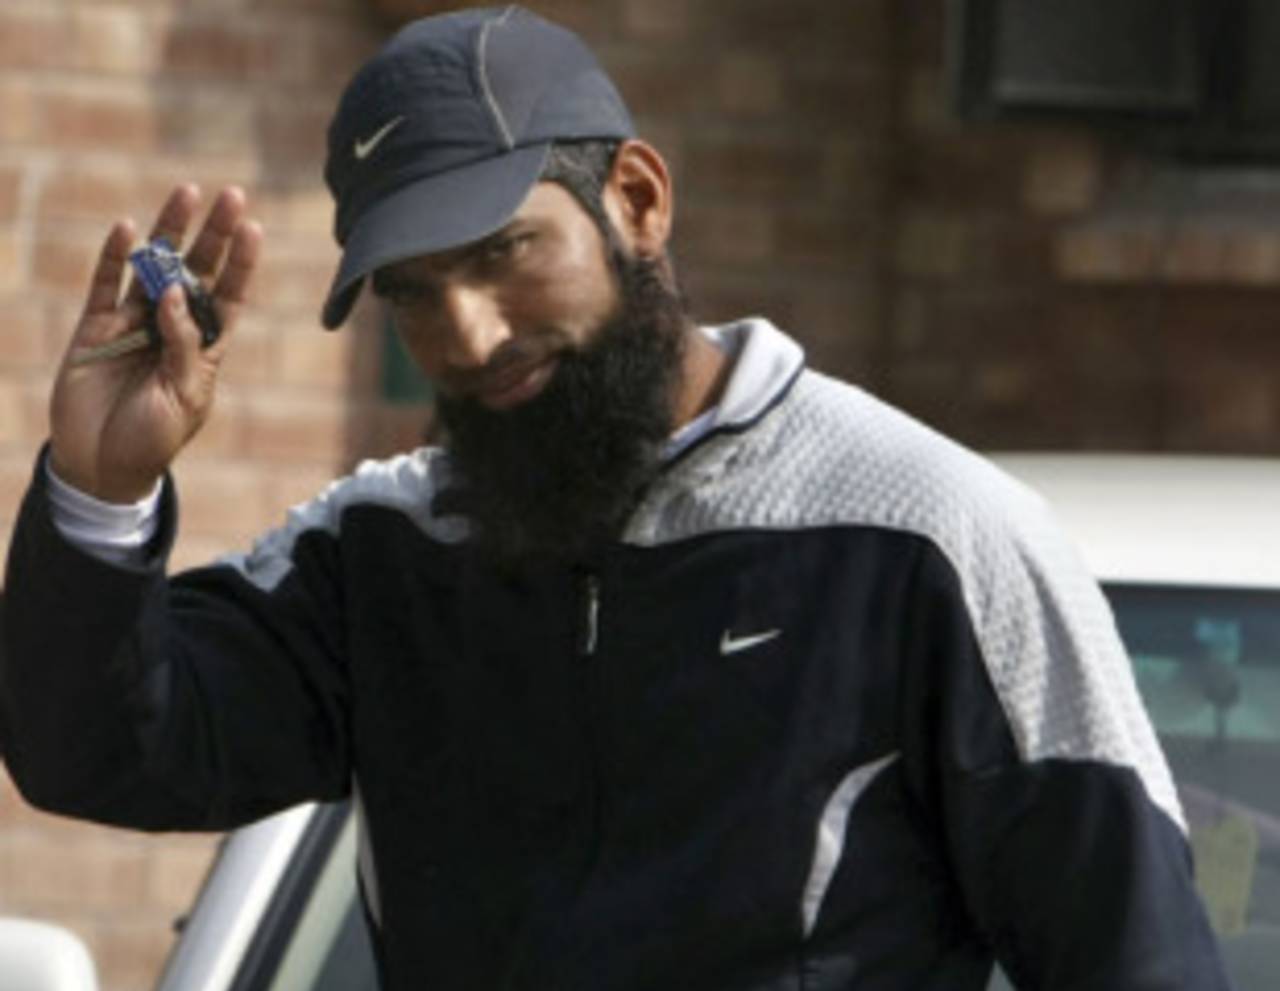 The PCB has cleared Mohammad Yousuf to play in a Bangladesh league, while denying permission to members of the World Twenty20 squad&nbsp;&nbsp;&bull;&nbsp;&nbsp;Associated Press